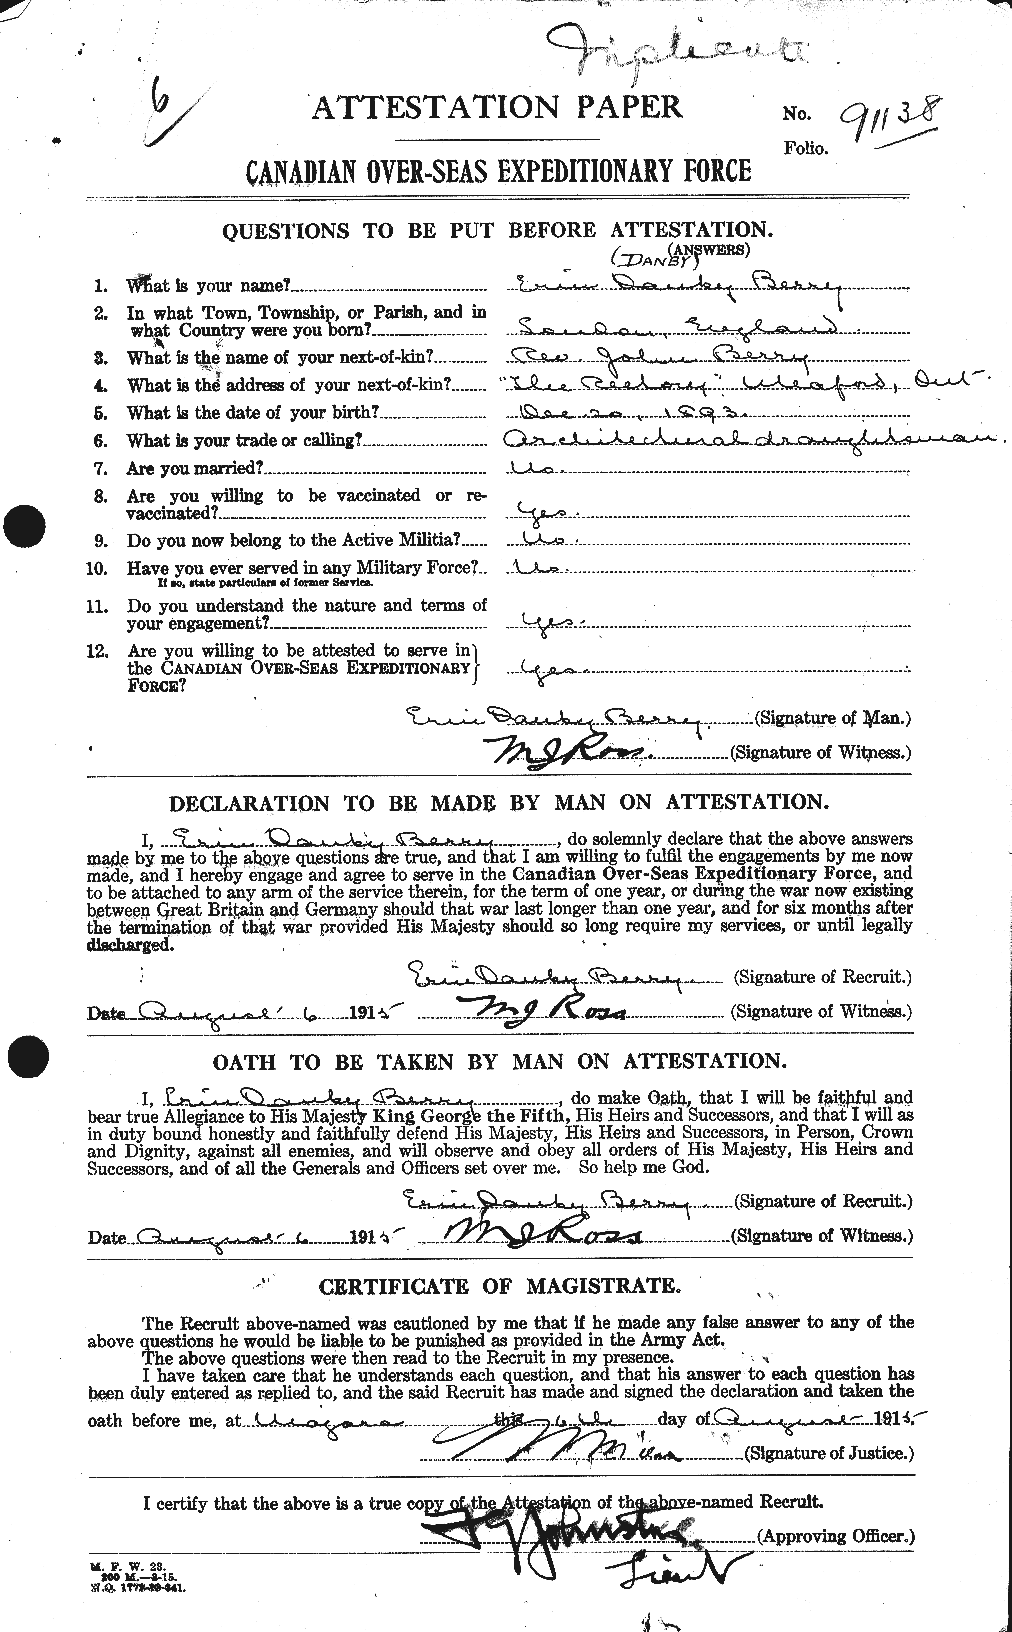 Personnel Records of the First World War - CEF 240854a